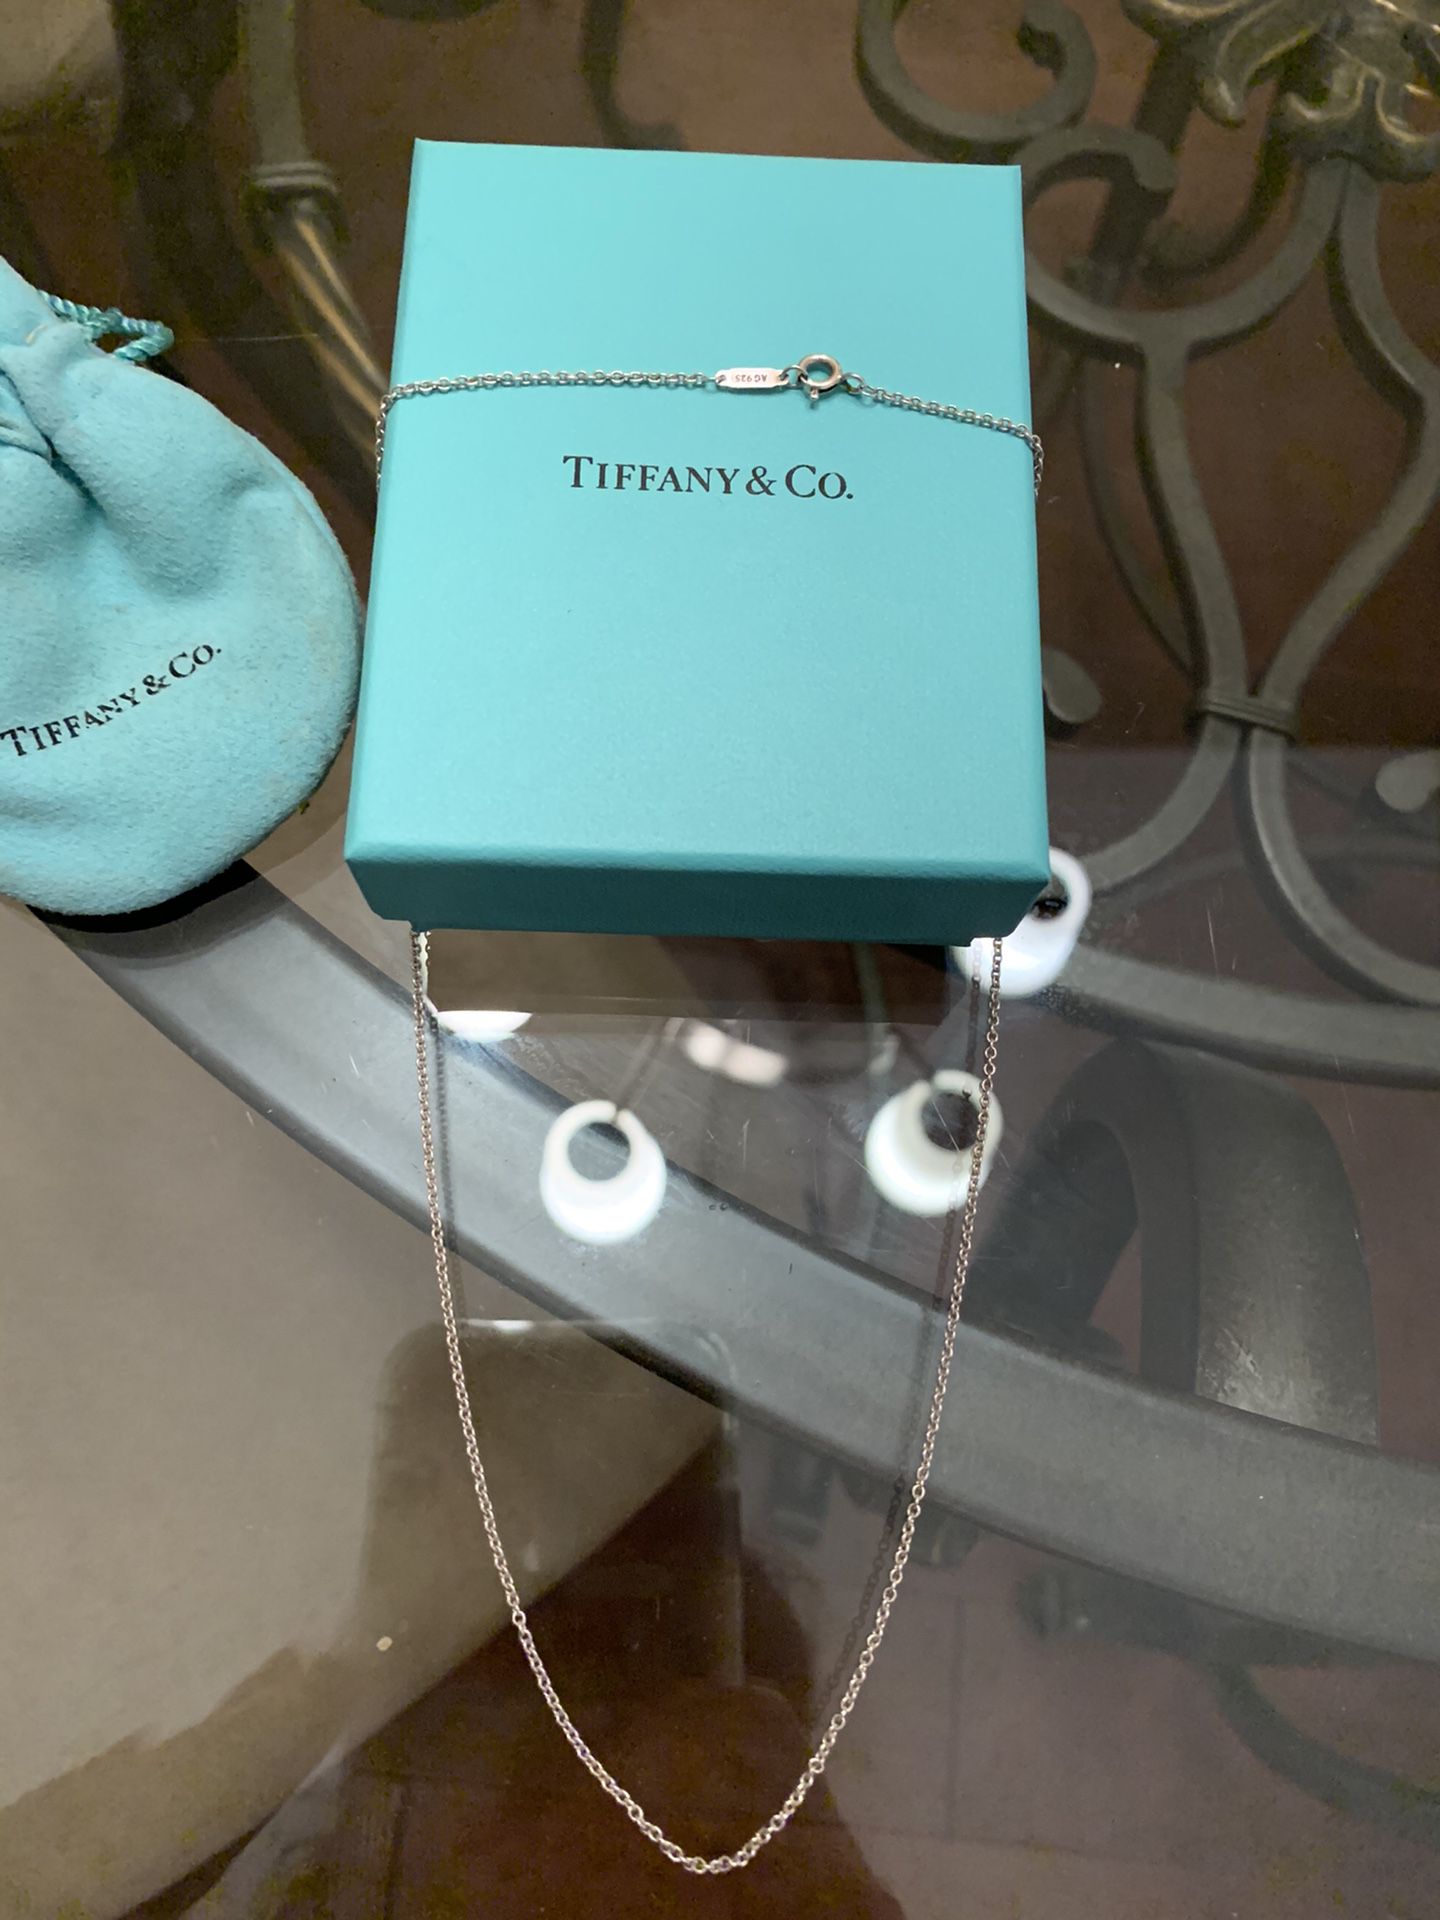 Tiffany’s sterling silver necklace